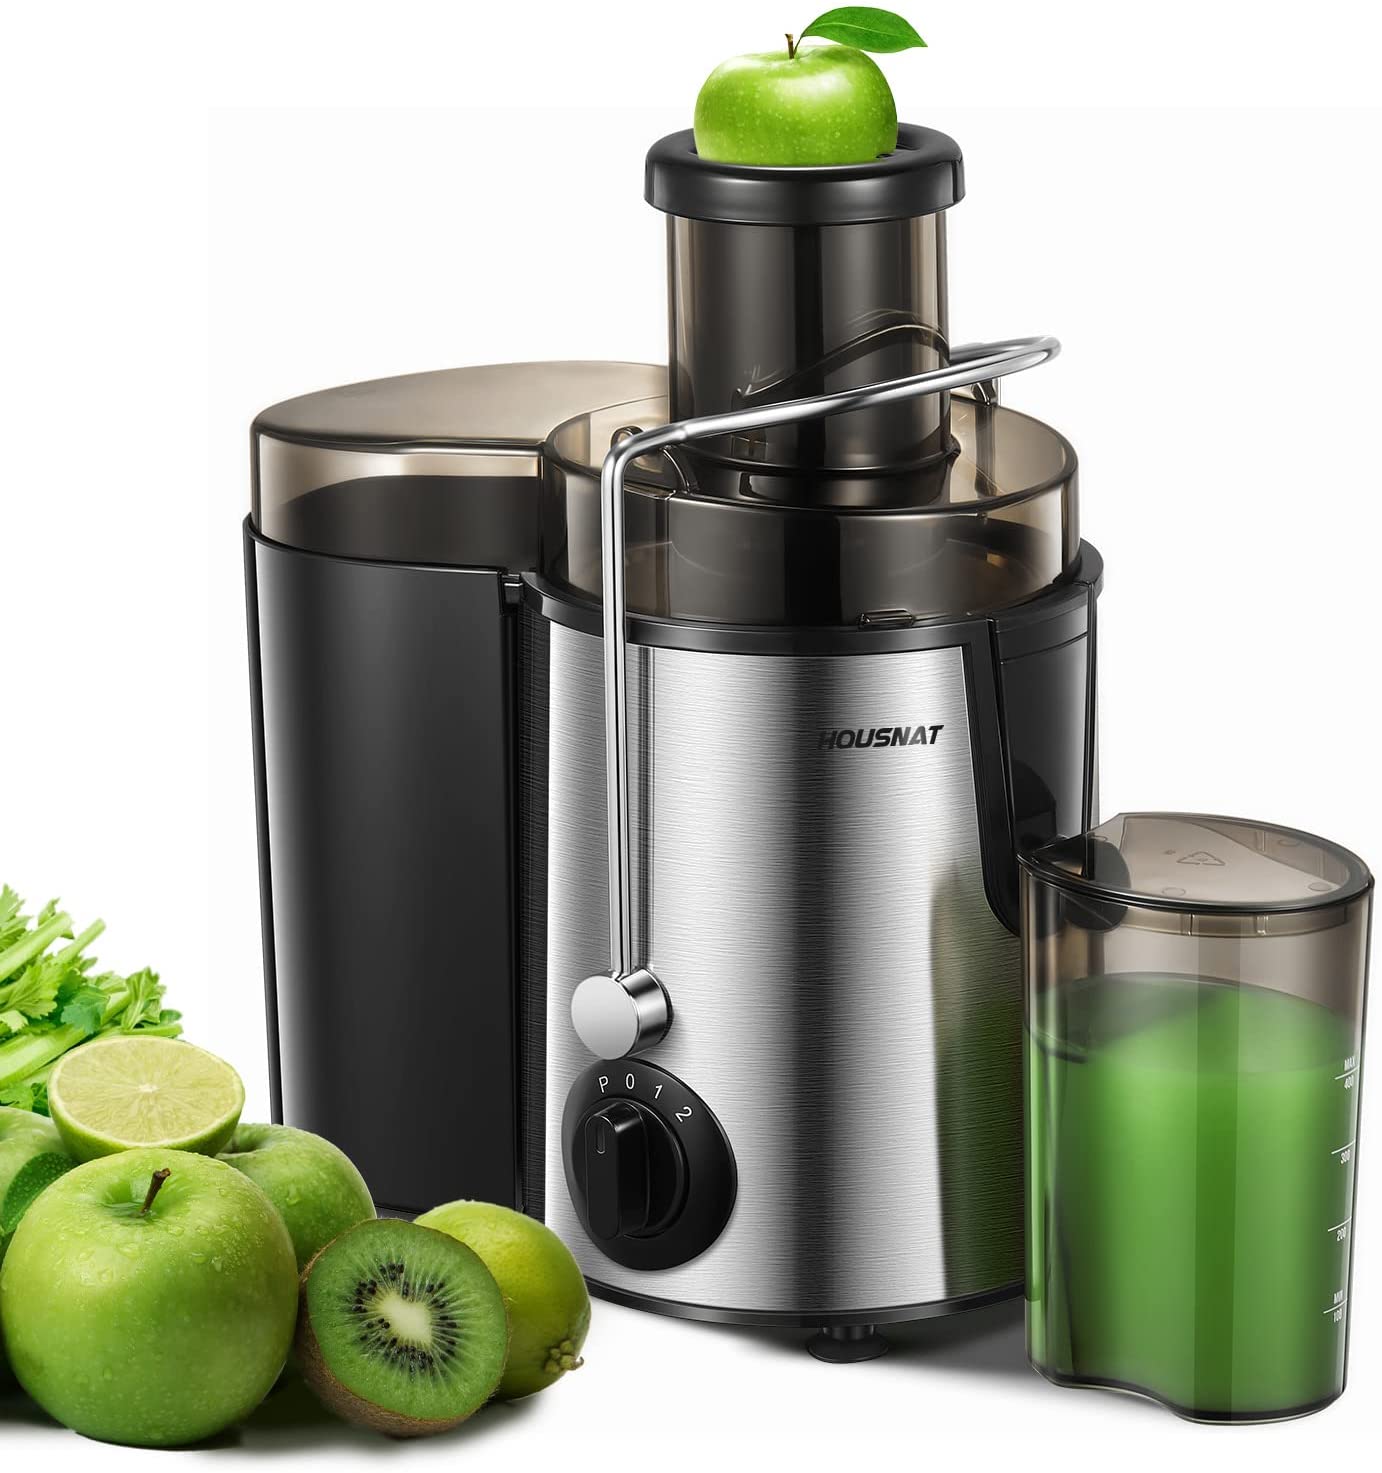 Juicer, HOUSNAT Juicer Machines Vegetable and Fruit with 3-Speed Setting, Upgraded Version 400W Motor Quick Juicing, Juicing Recipe Included